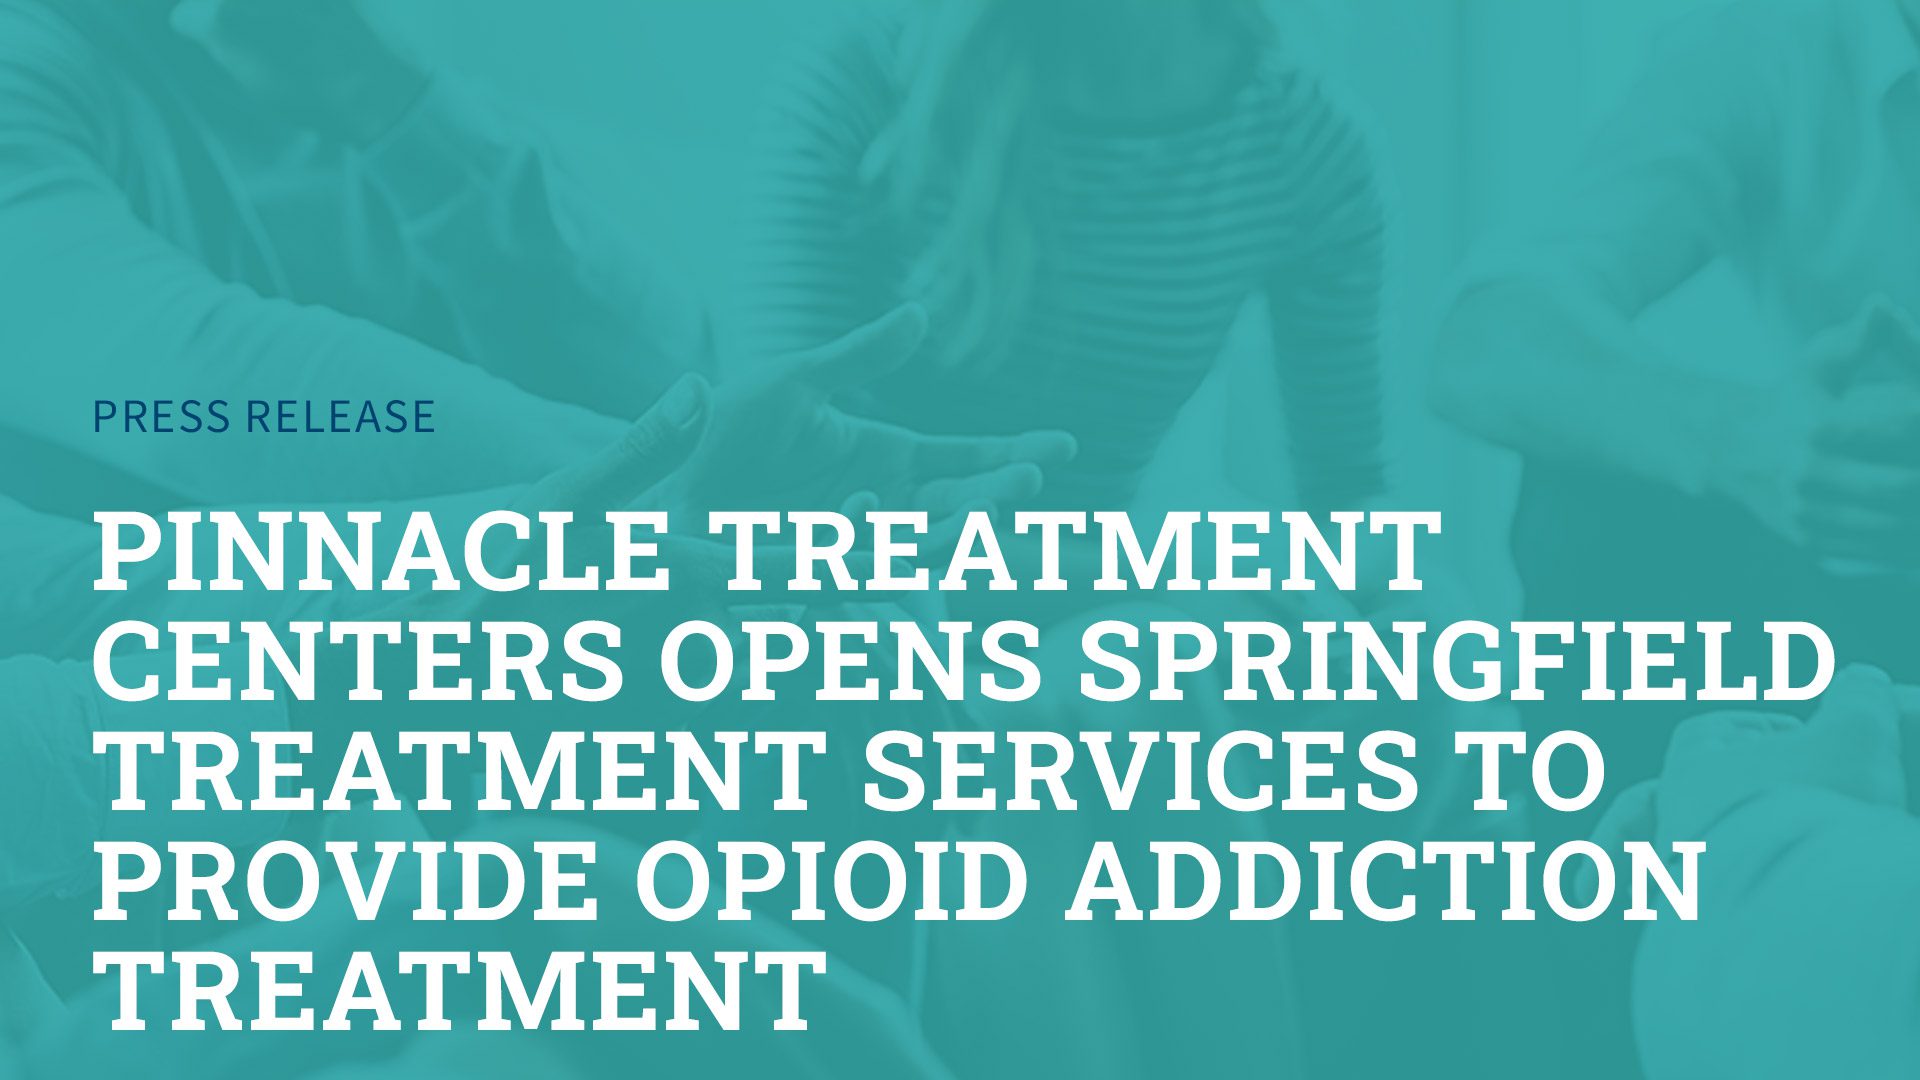 Pinnacle Treatment Centers Opens Springfield Treatment Services to provide opioid addiction treatment for community